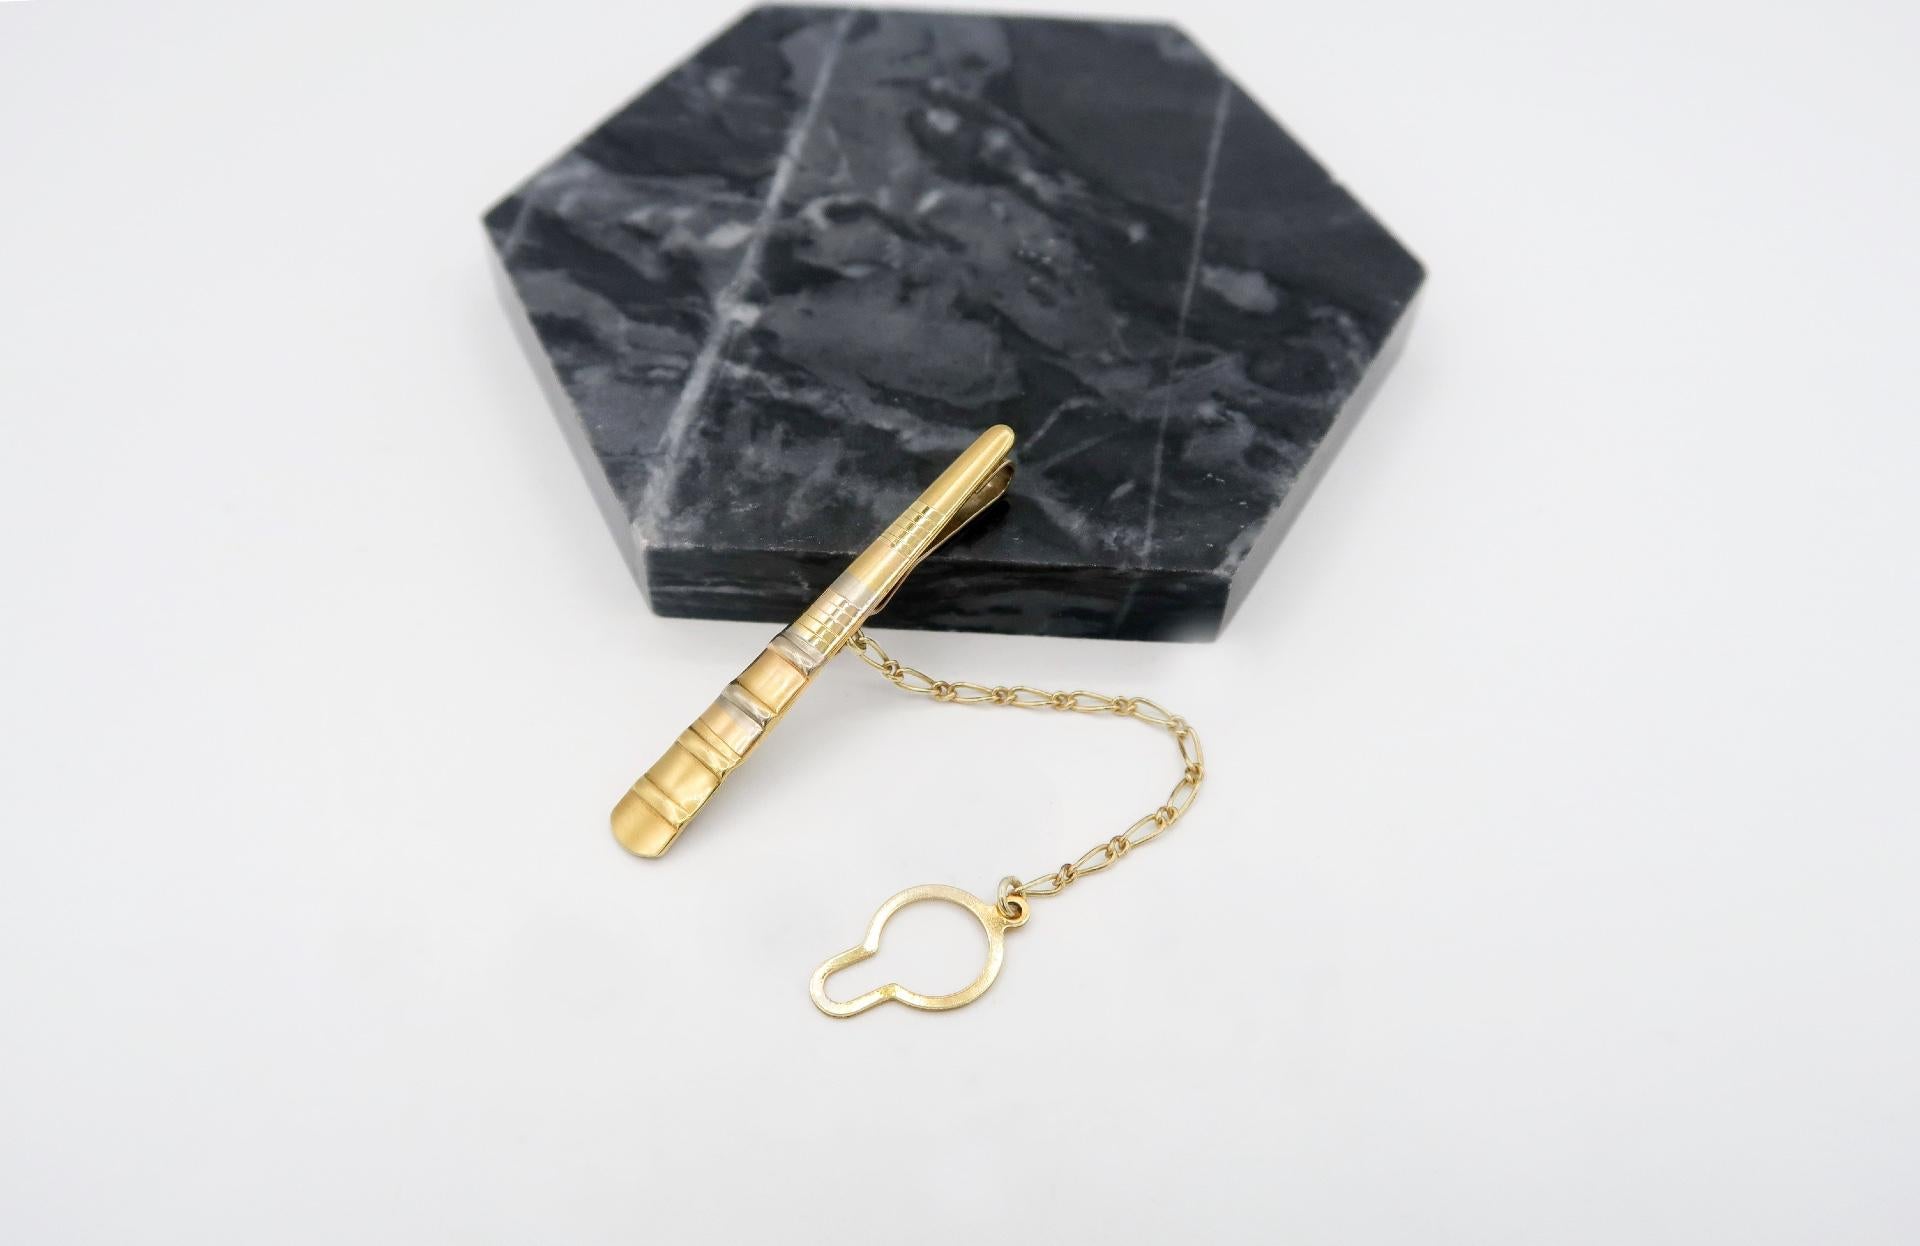 Multitextured Brushed Shiny Wide Rounded End Tie Bar Clip with Chain entirely made in 18K Gold

Gold: 18K Gold, 5.378

Length: 49 mm
Width: 7 mm

Please let us know should you wish to have the tie bar engraved.